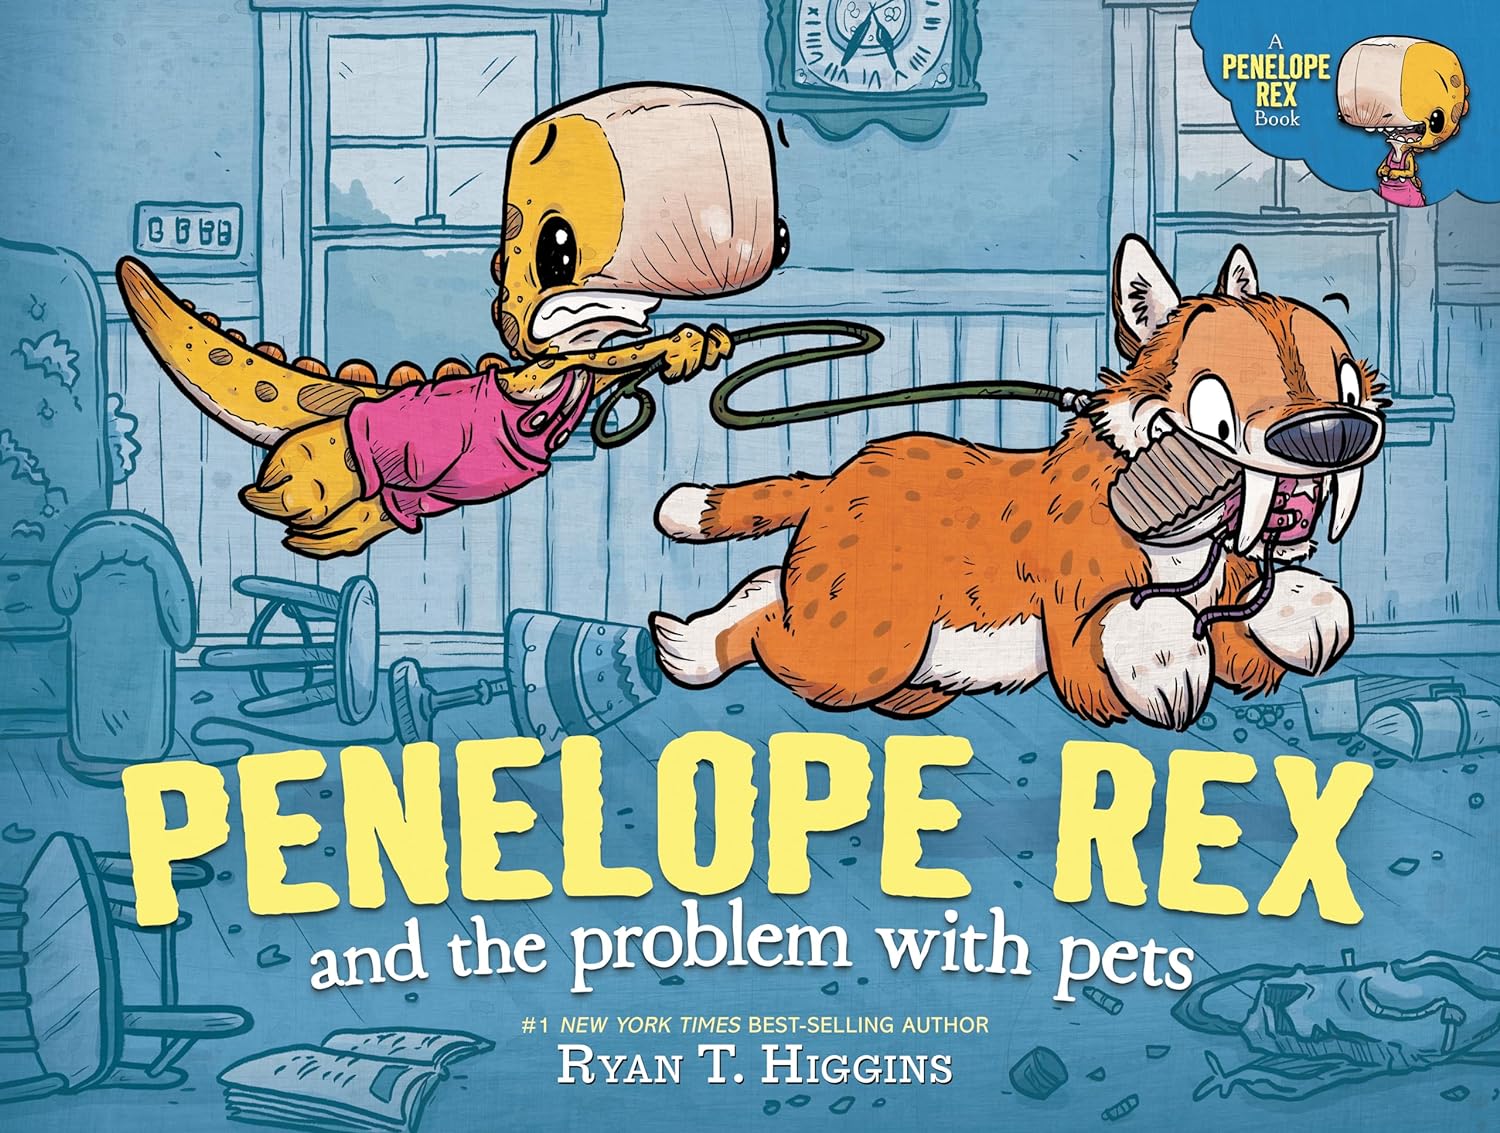 Penelope Rex and the Problem with Pets by Ryan T. Higgins